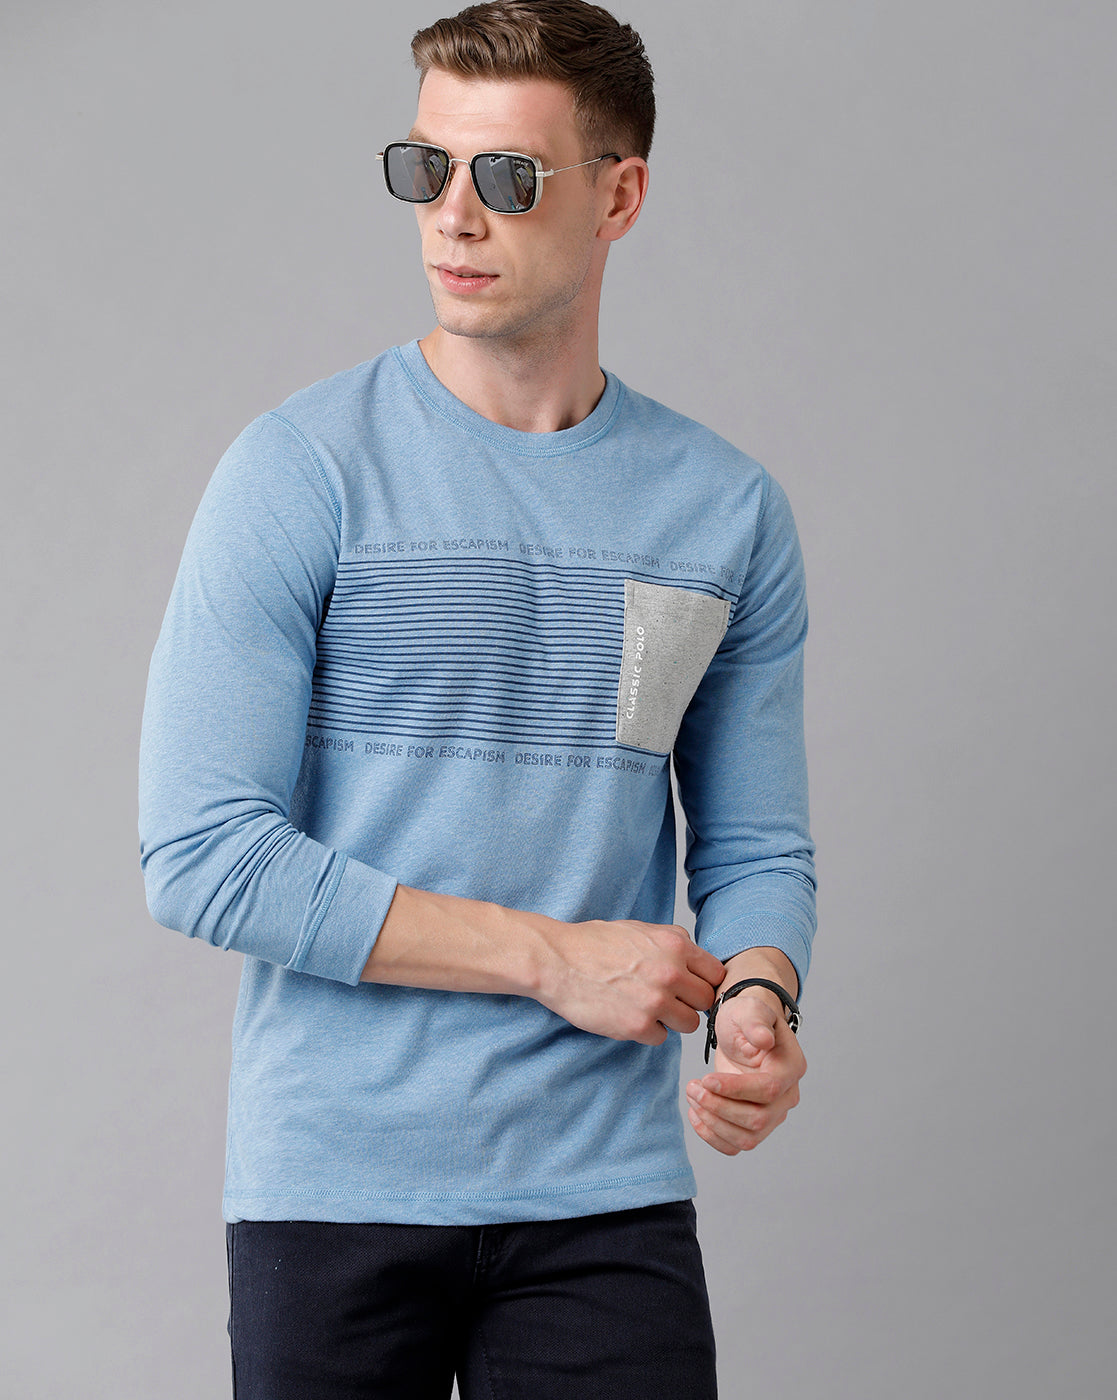 Classic Polo Men's Cotton Printed Full Sleeve Slim Fit Round Neck Blue Color T-Shirt | Baleno Fs - 478 B